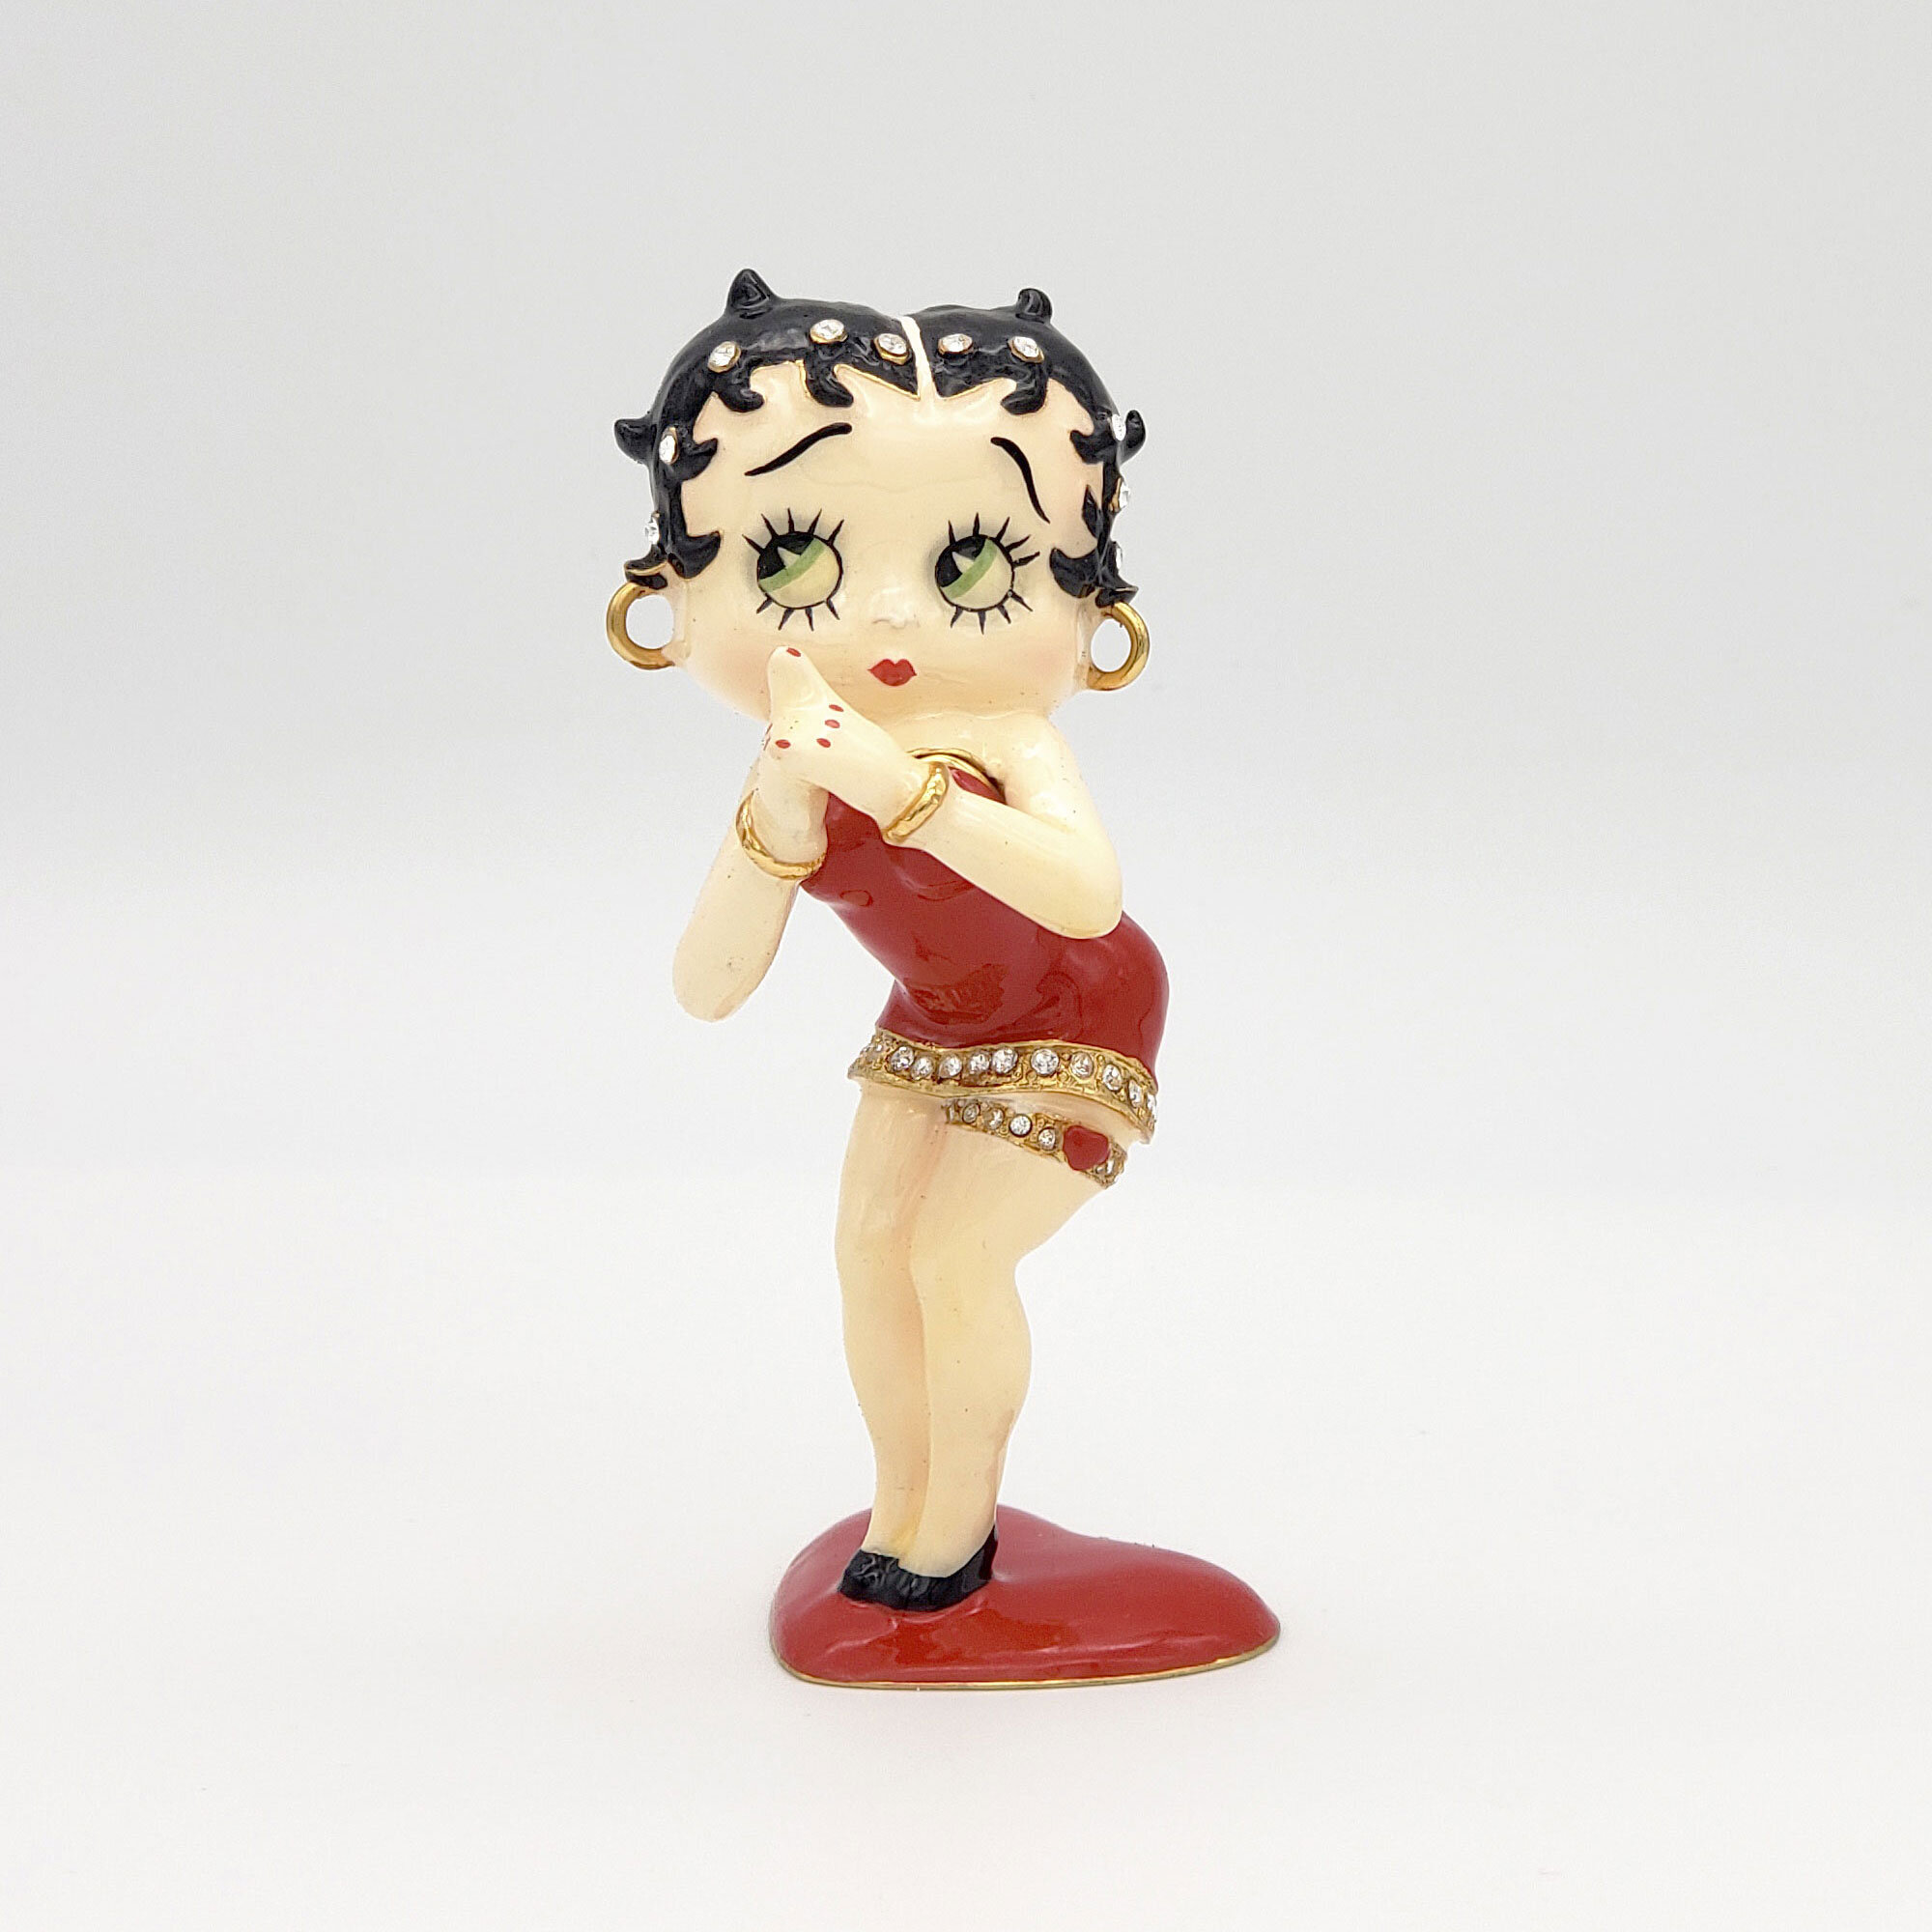 Betty Boop Pillow Red White & Boop Pillow Cartoon Pillow HANDMADE In USA Pillow is approximately 10 X 11 .